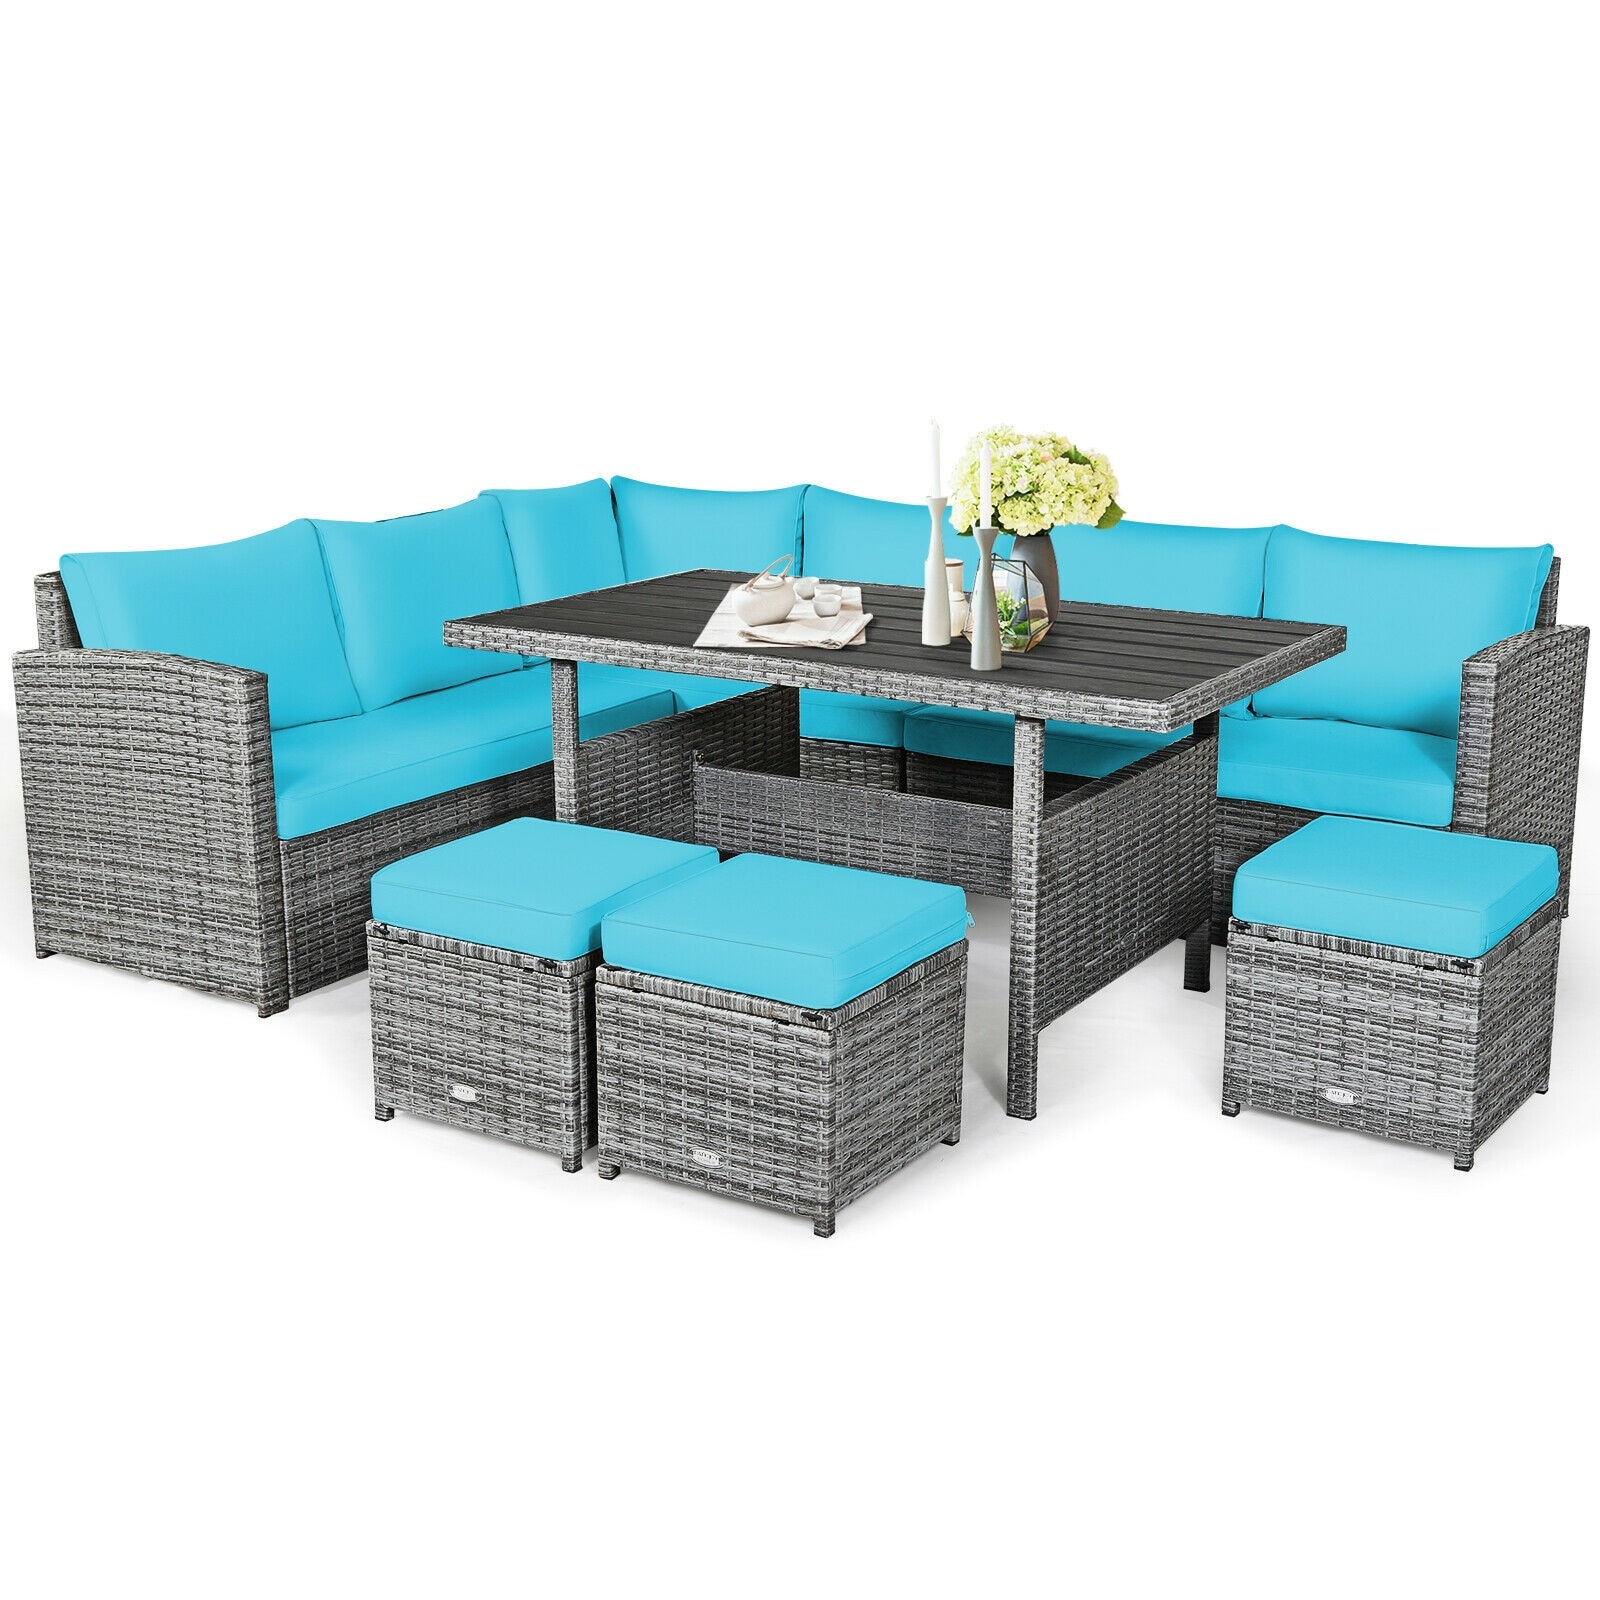 7 Pieces Patio Rattan Turquoise Dining Furniture Sectional Sofa Set with Wicker Ottoman | - Forclover HYFAS18TU